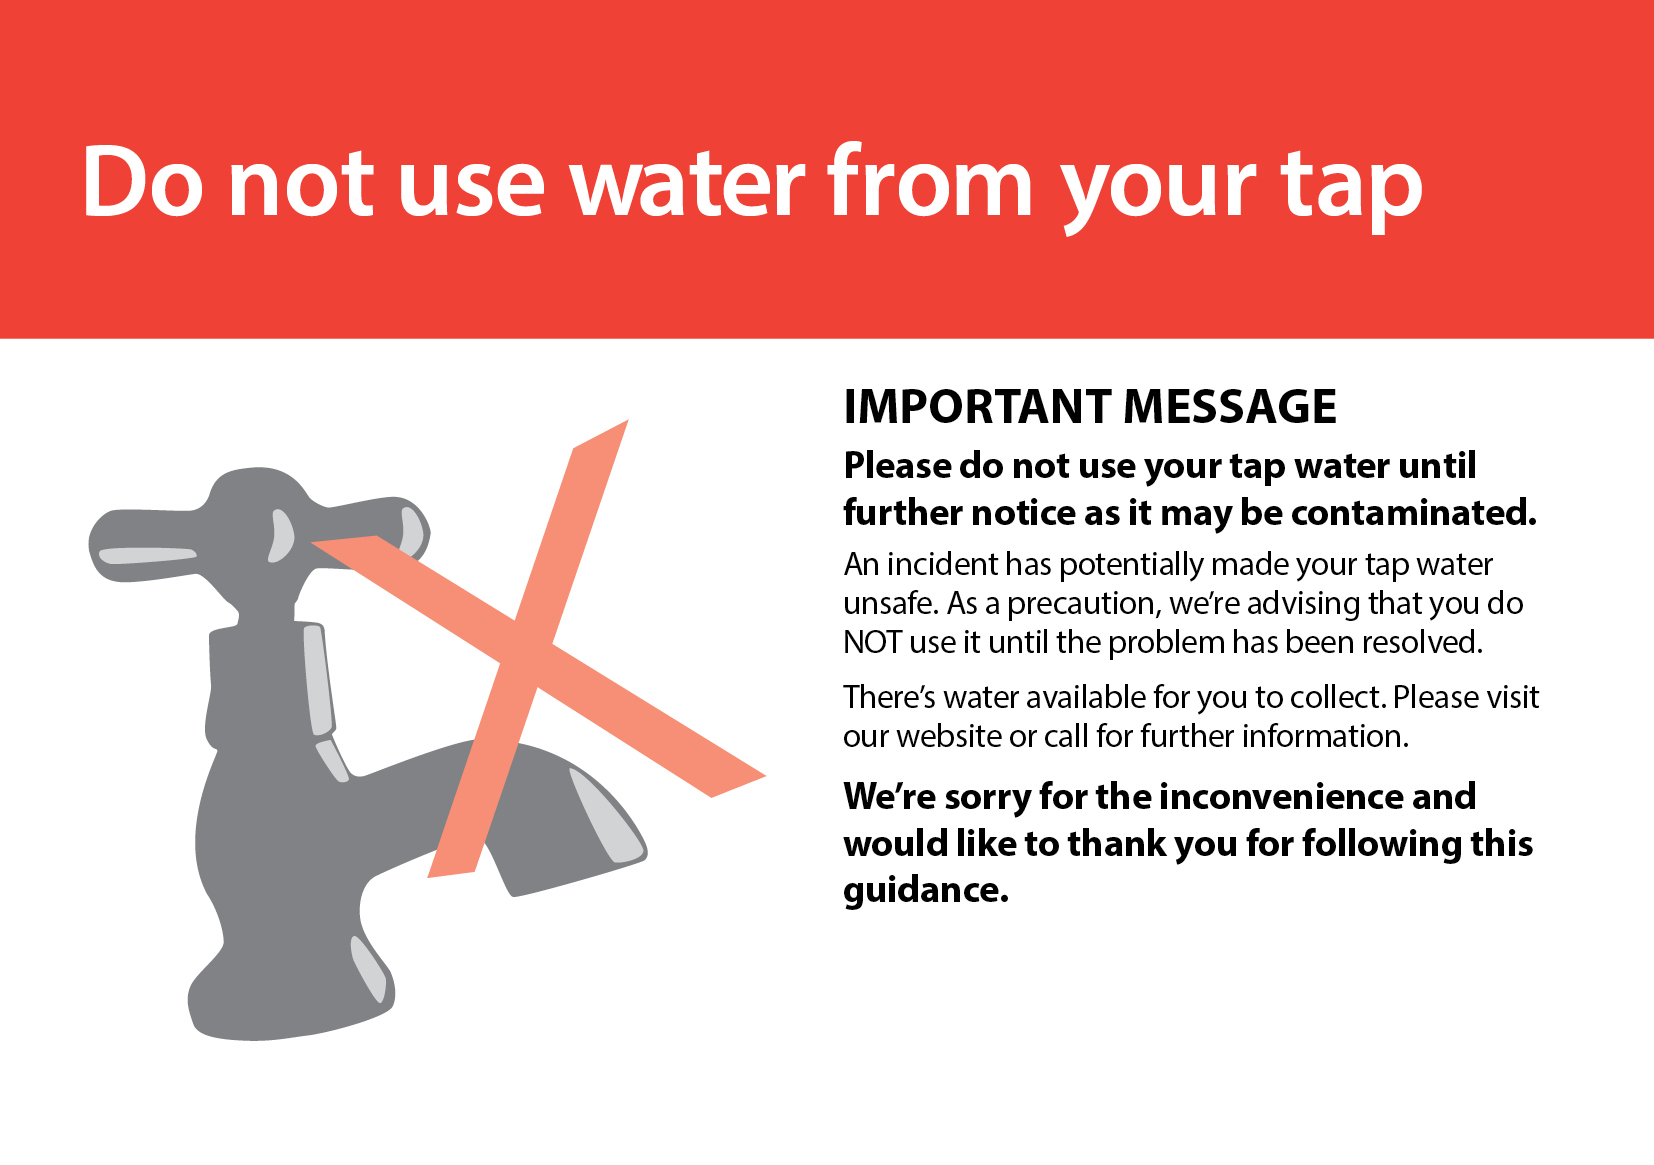 Graphic stating "Do not use water"